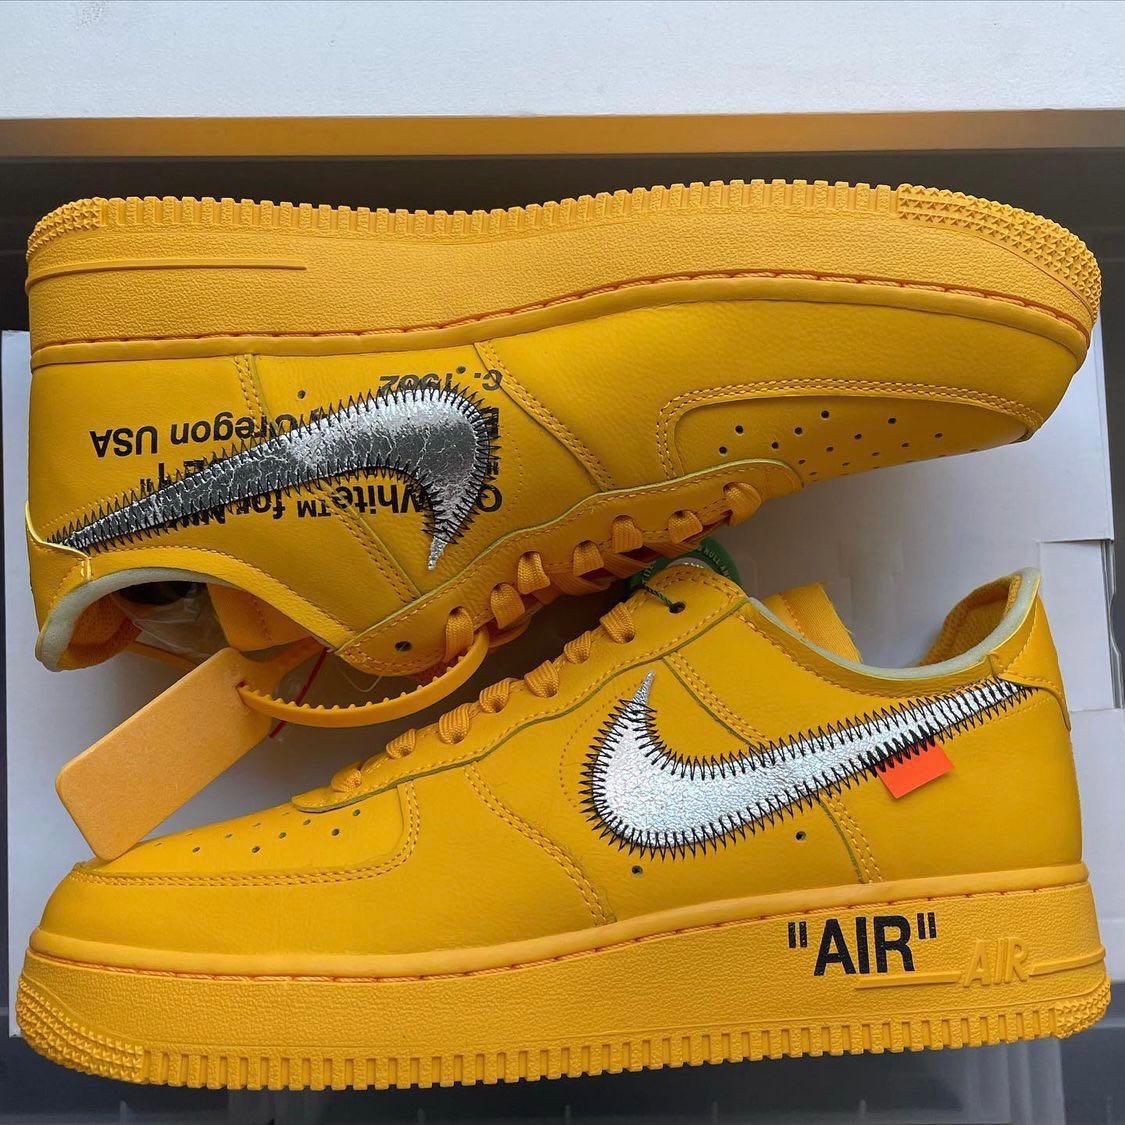 Nike Air Force 1 Low Off-white University Gold Metallic Silver in Yellow